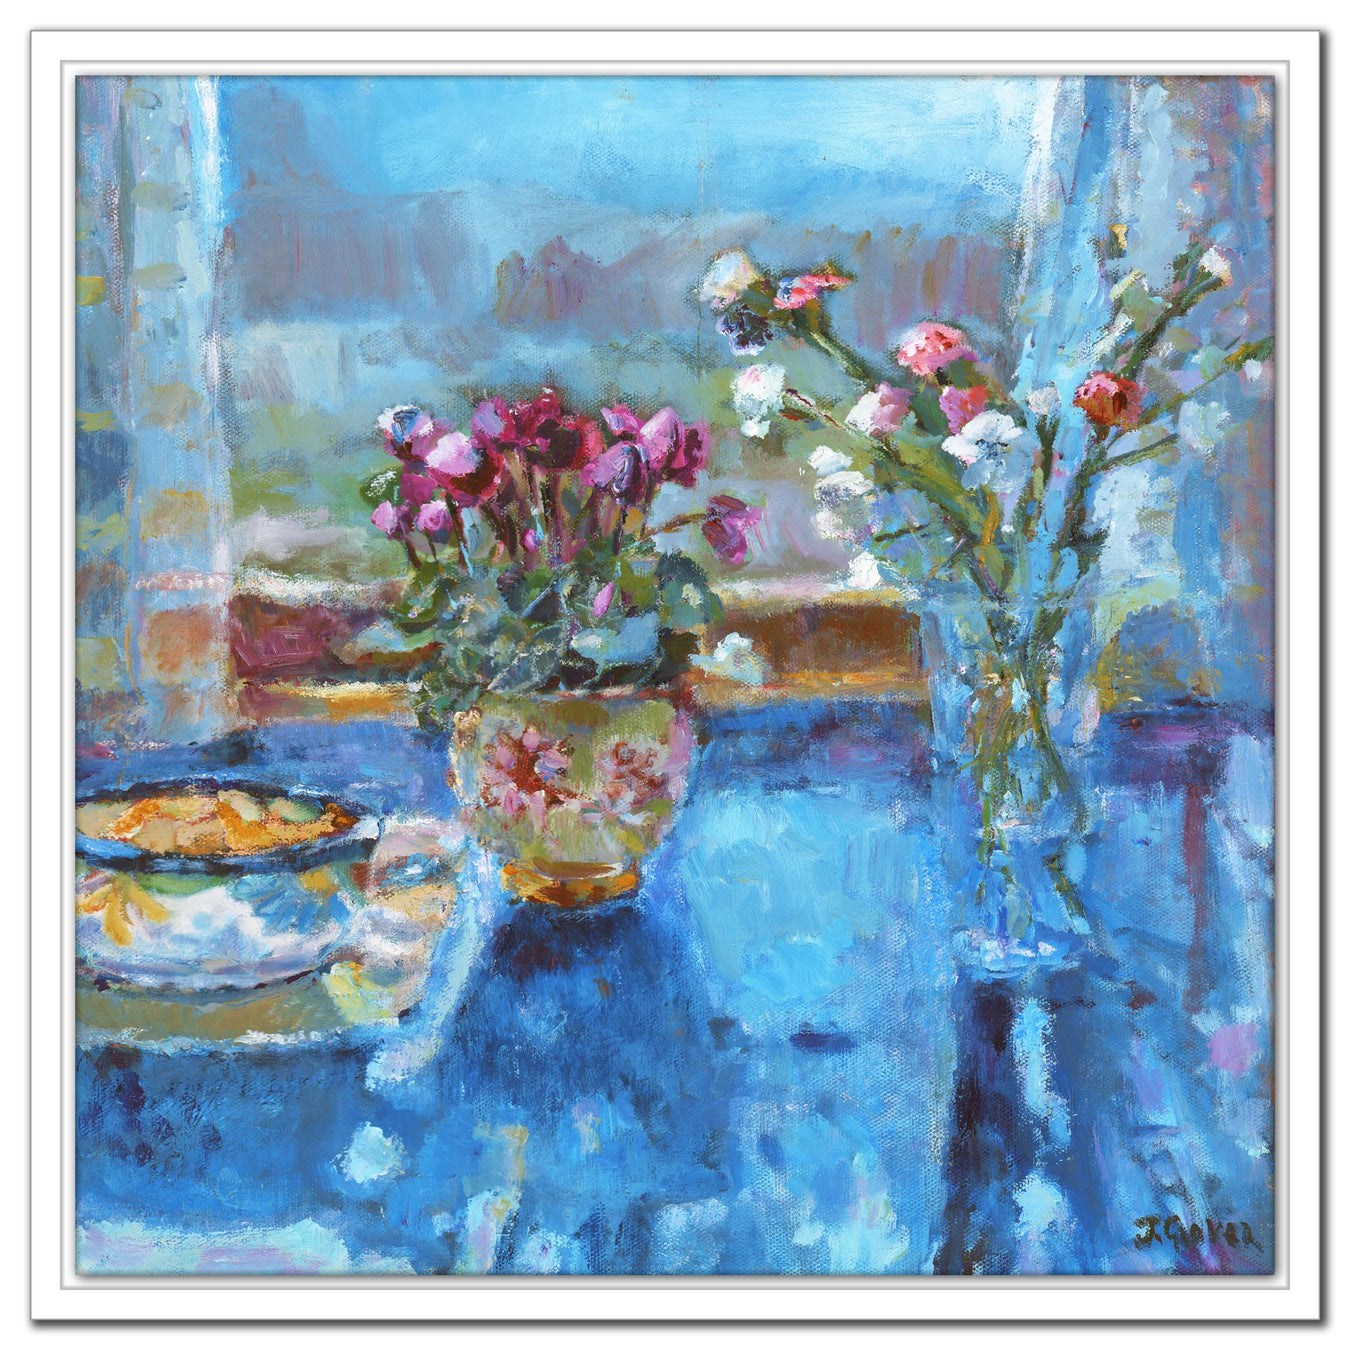 Still Life Canvas Prints. Add warmth and comfort with a still life canvas print made from original art. Browse the still life canvas print collection depicting serene scenes.